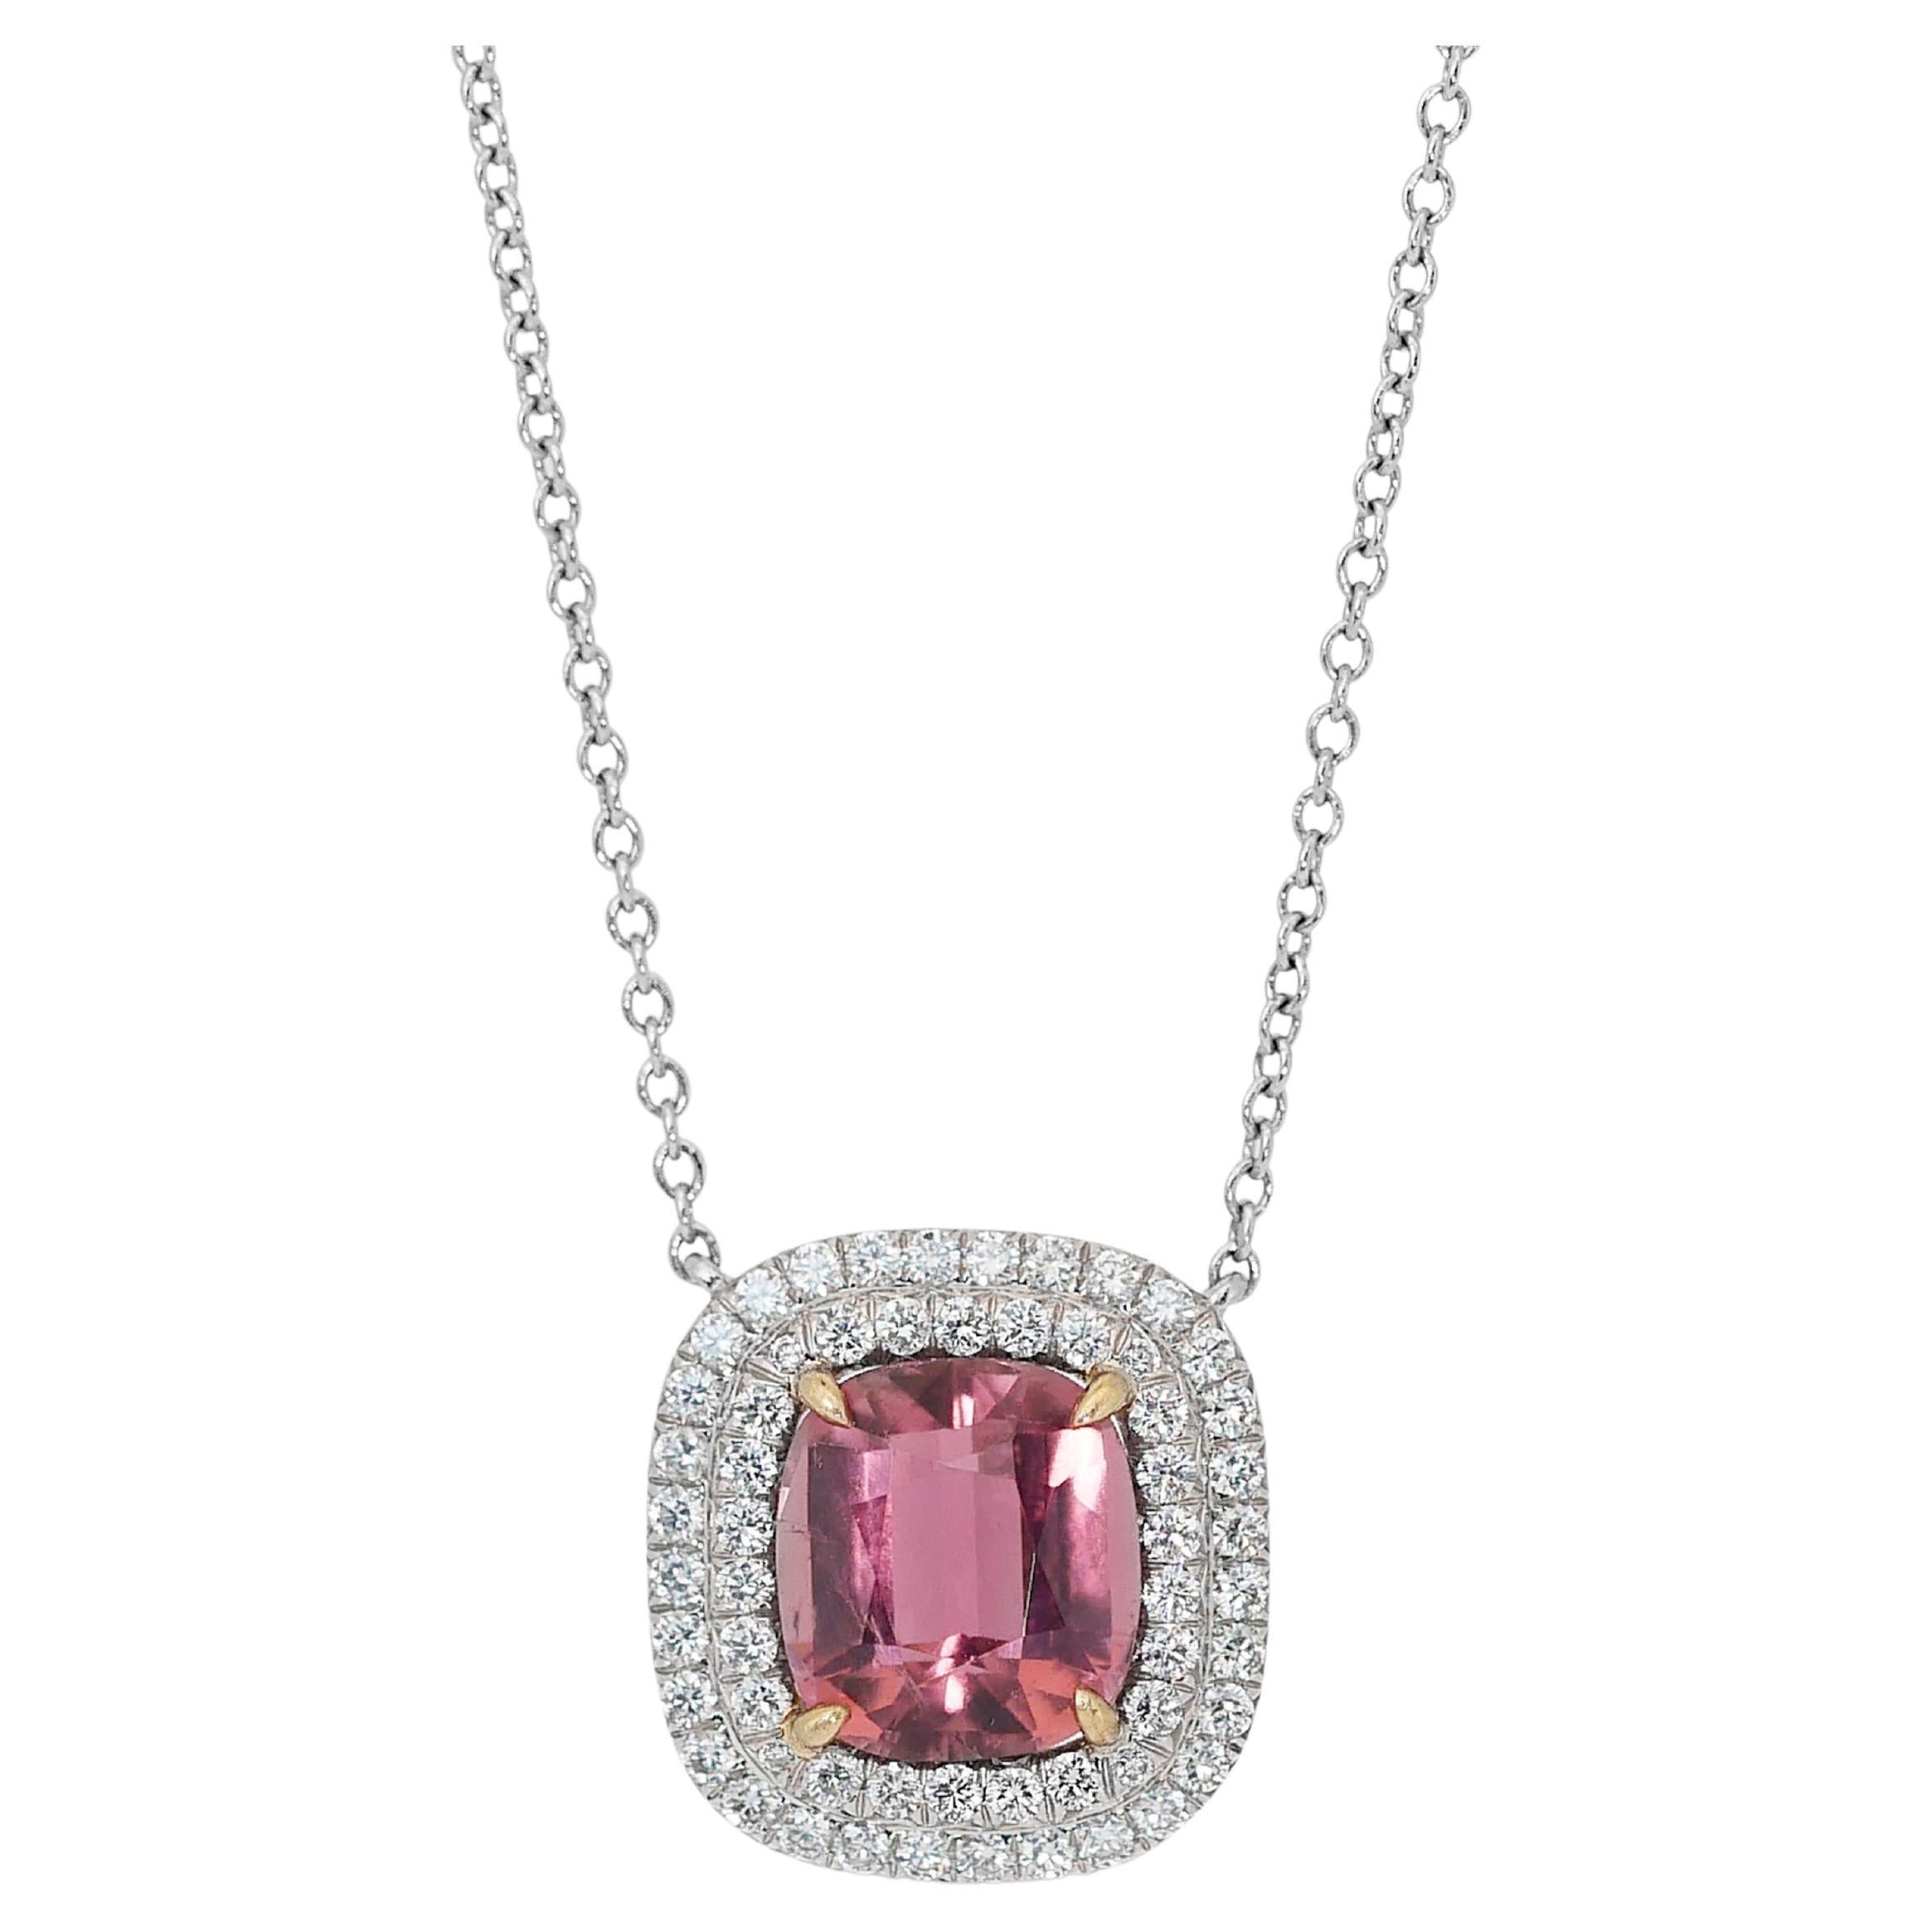 Alluring 2.70ct Tourmaline and Diamonds Halo Necklace in 18k White & Yellow Gold For Sale